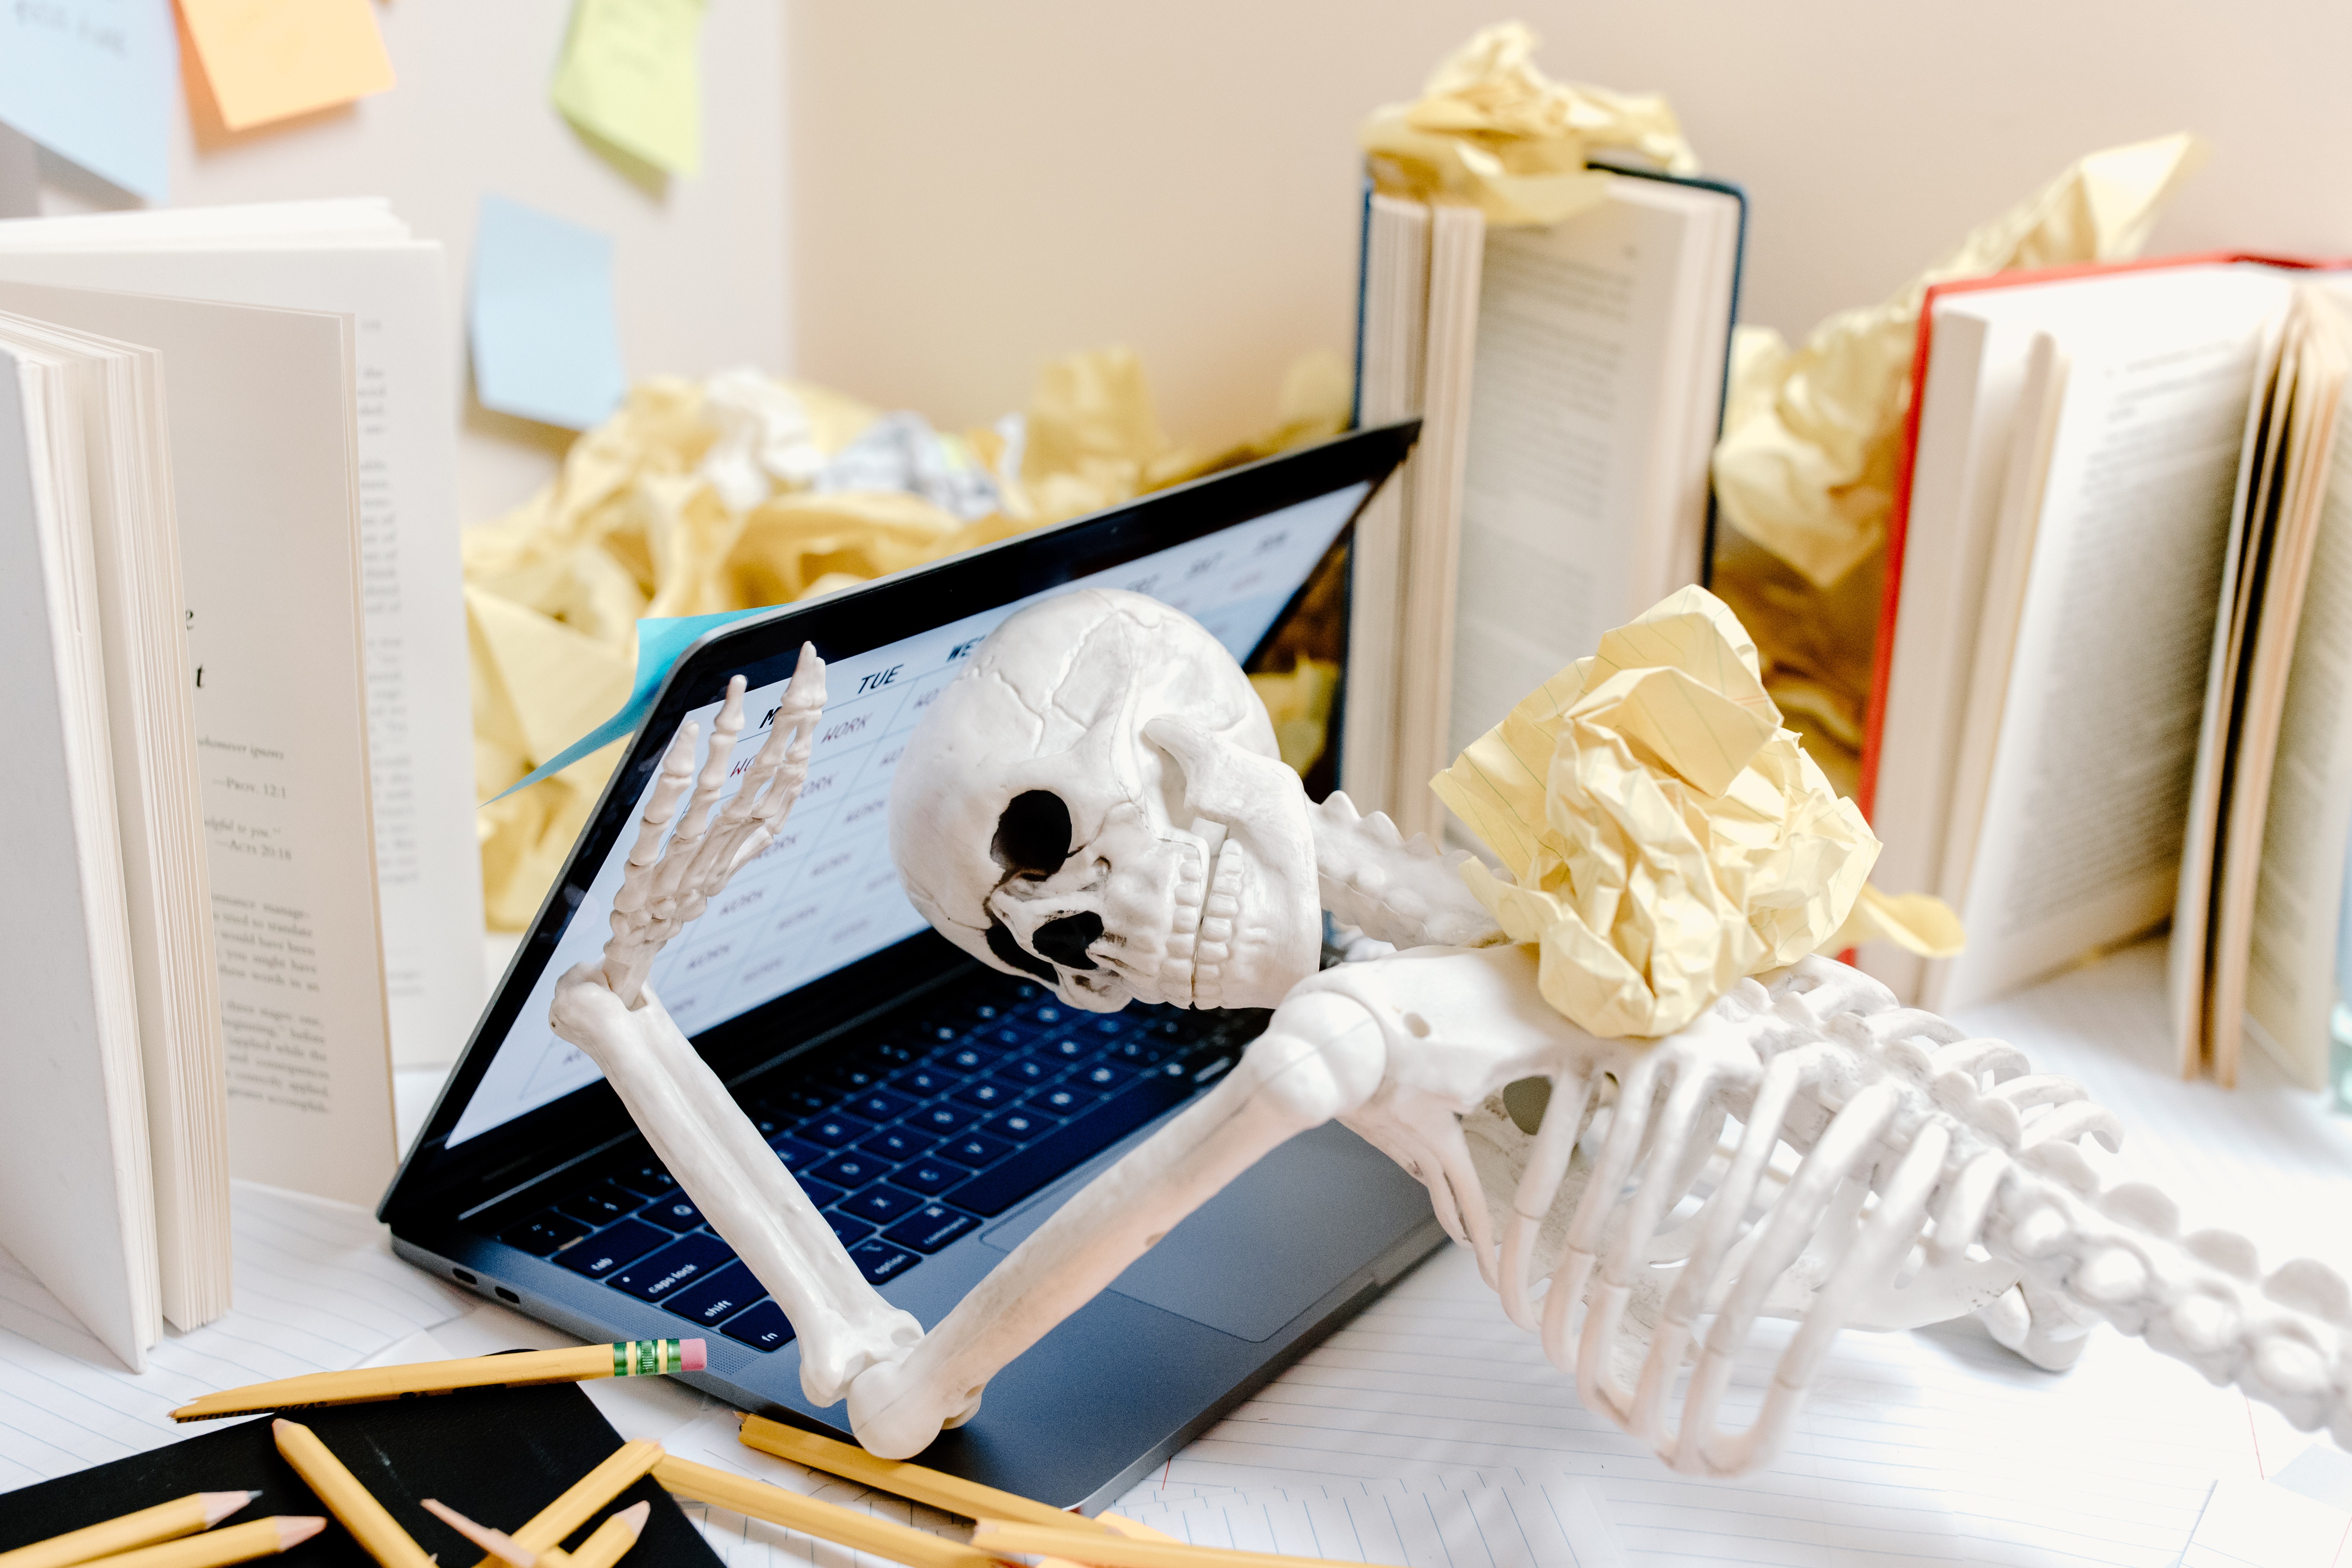 A skeleton has collapsed typing at a laptop with crumpled papers all around it